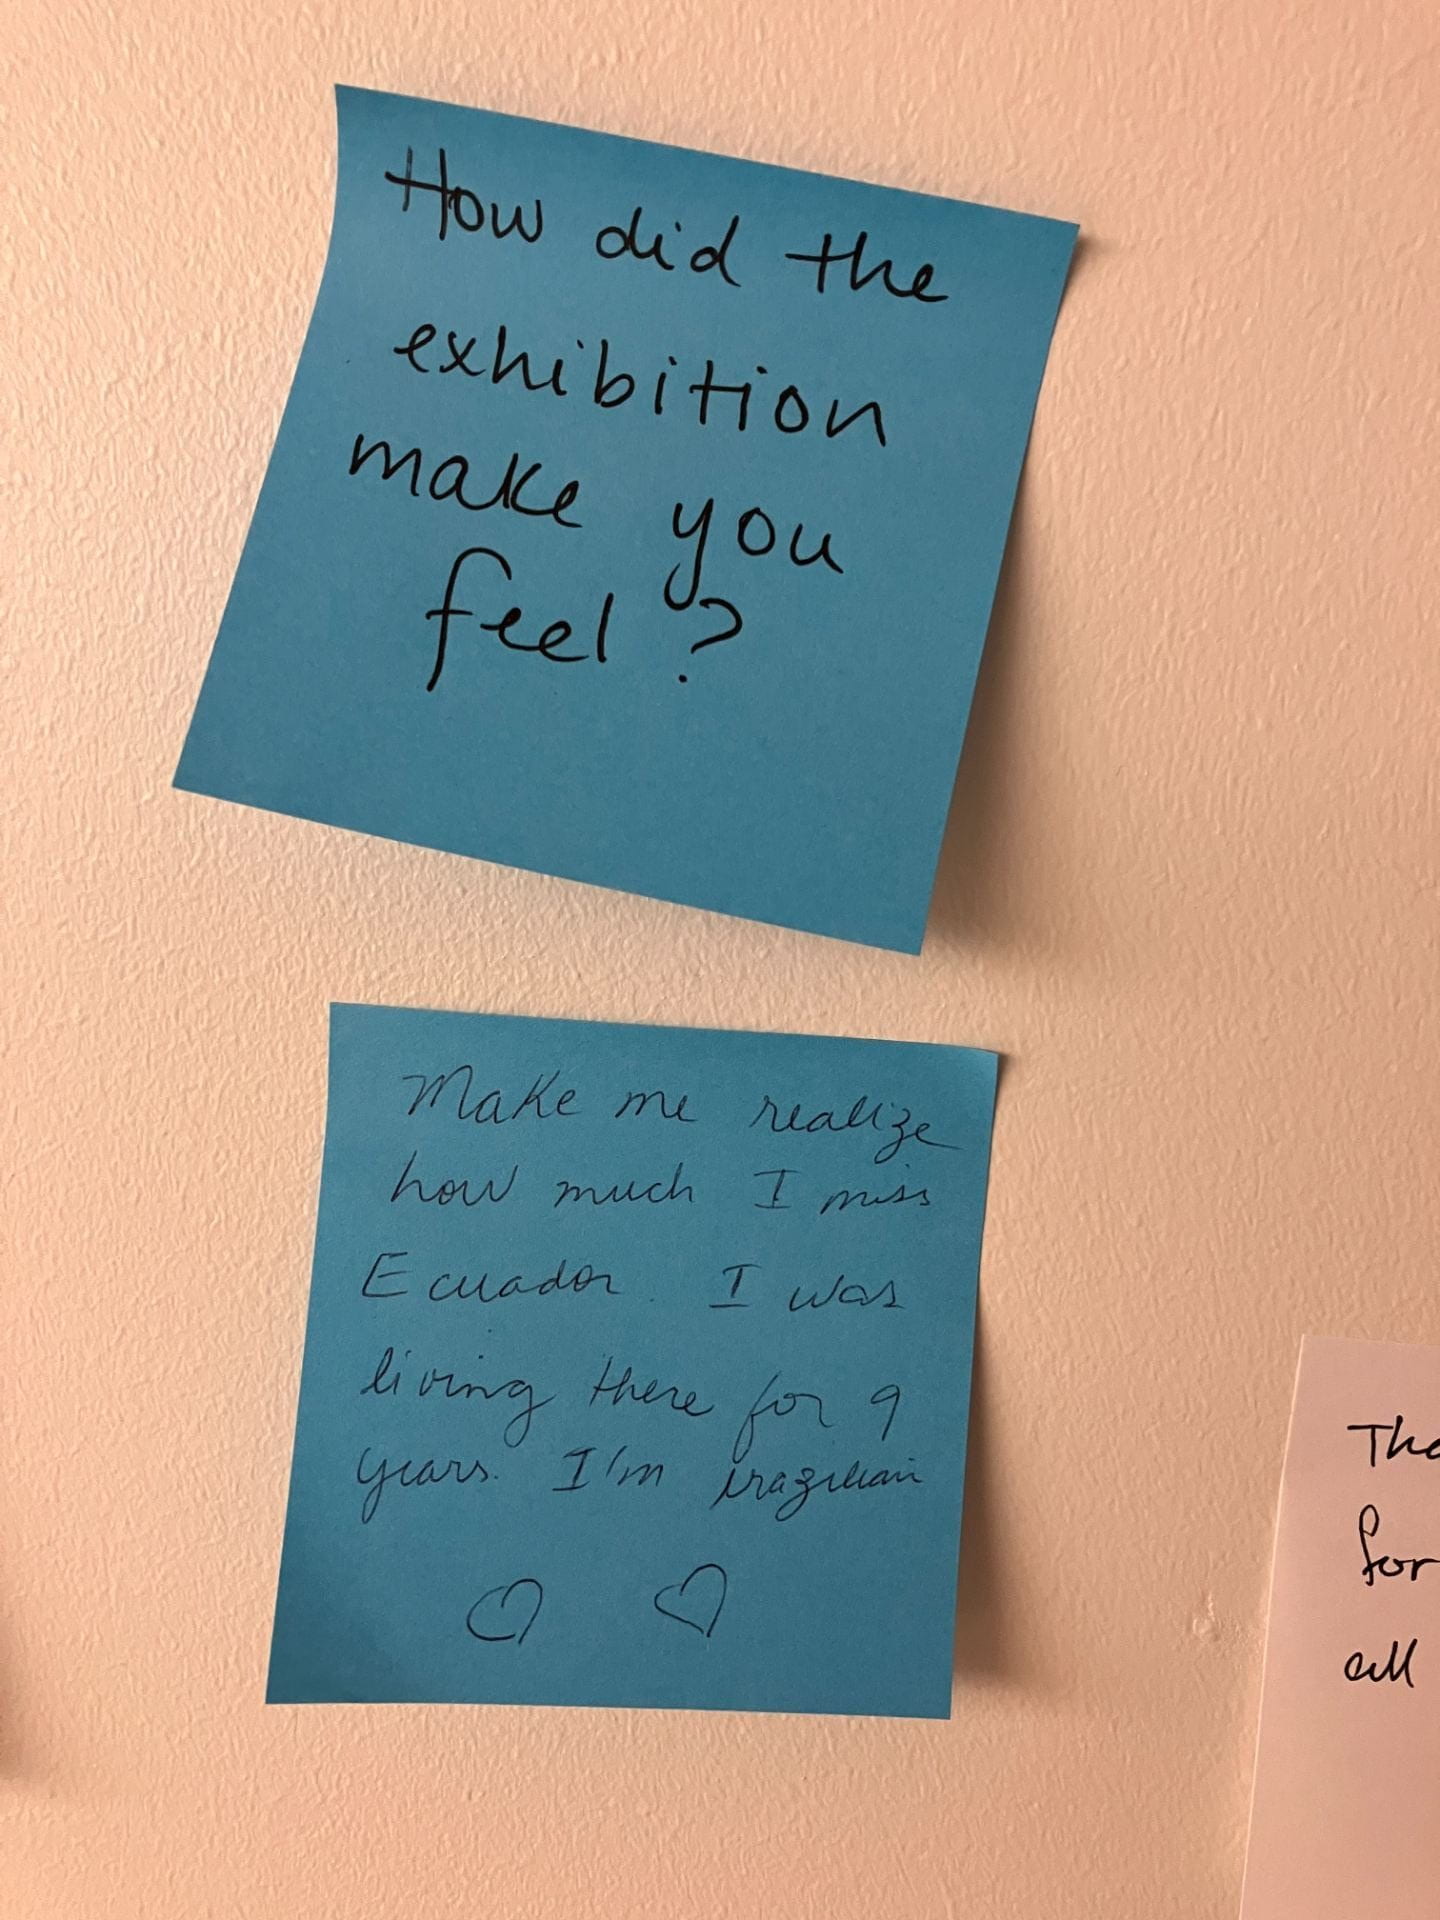 post it with visitor comments